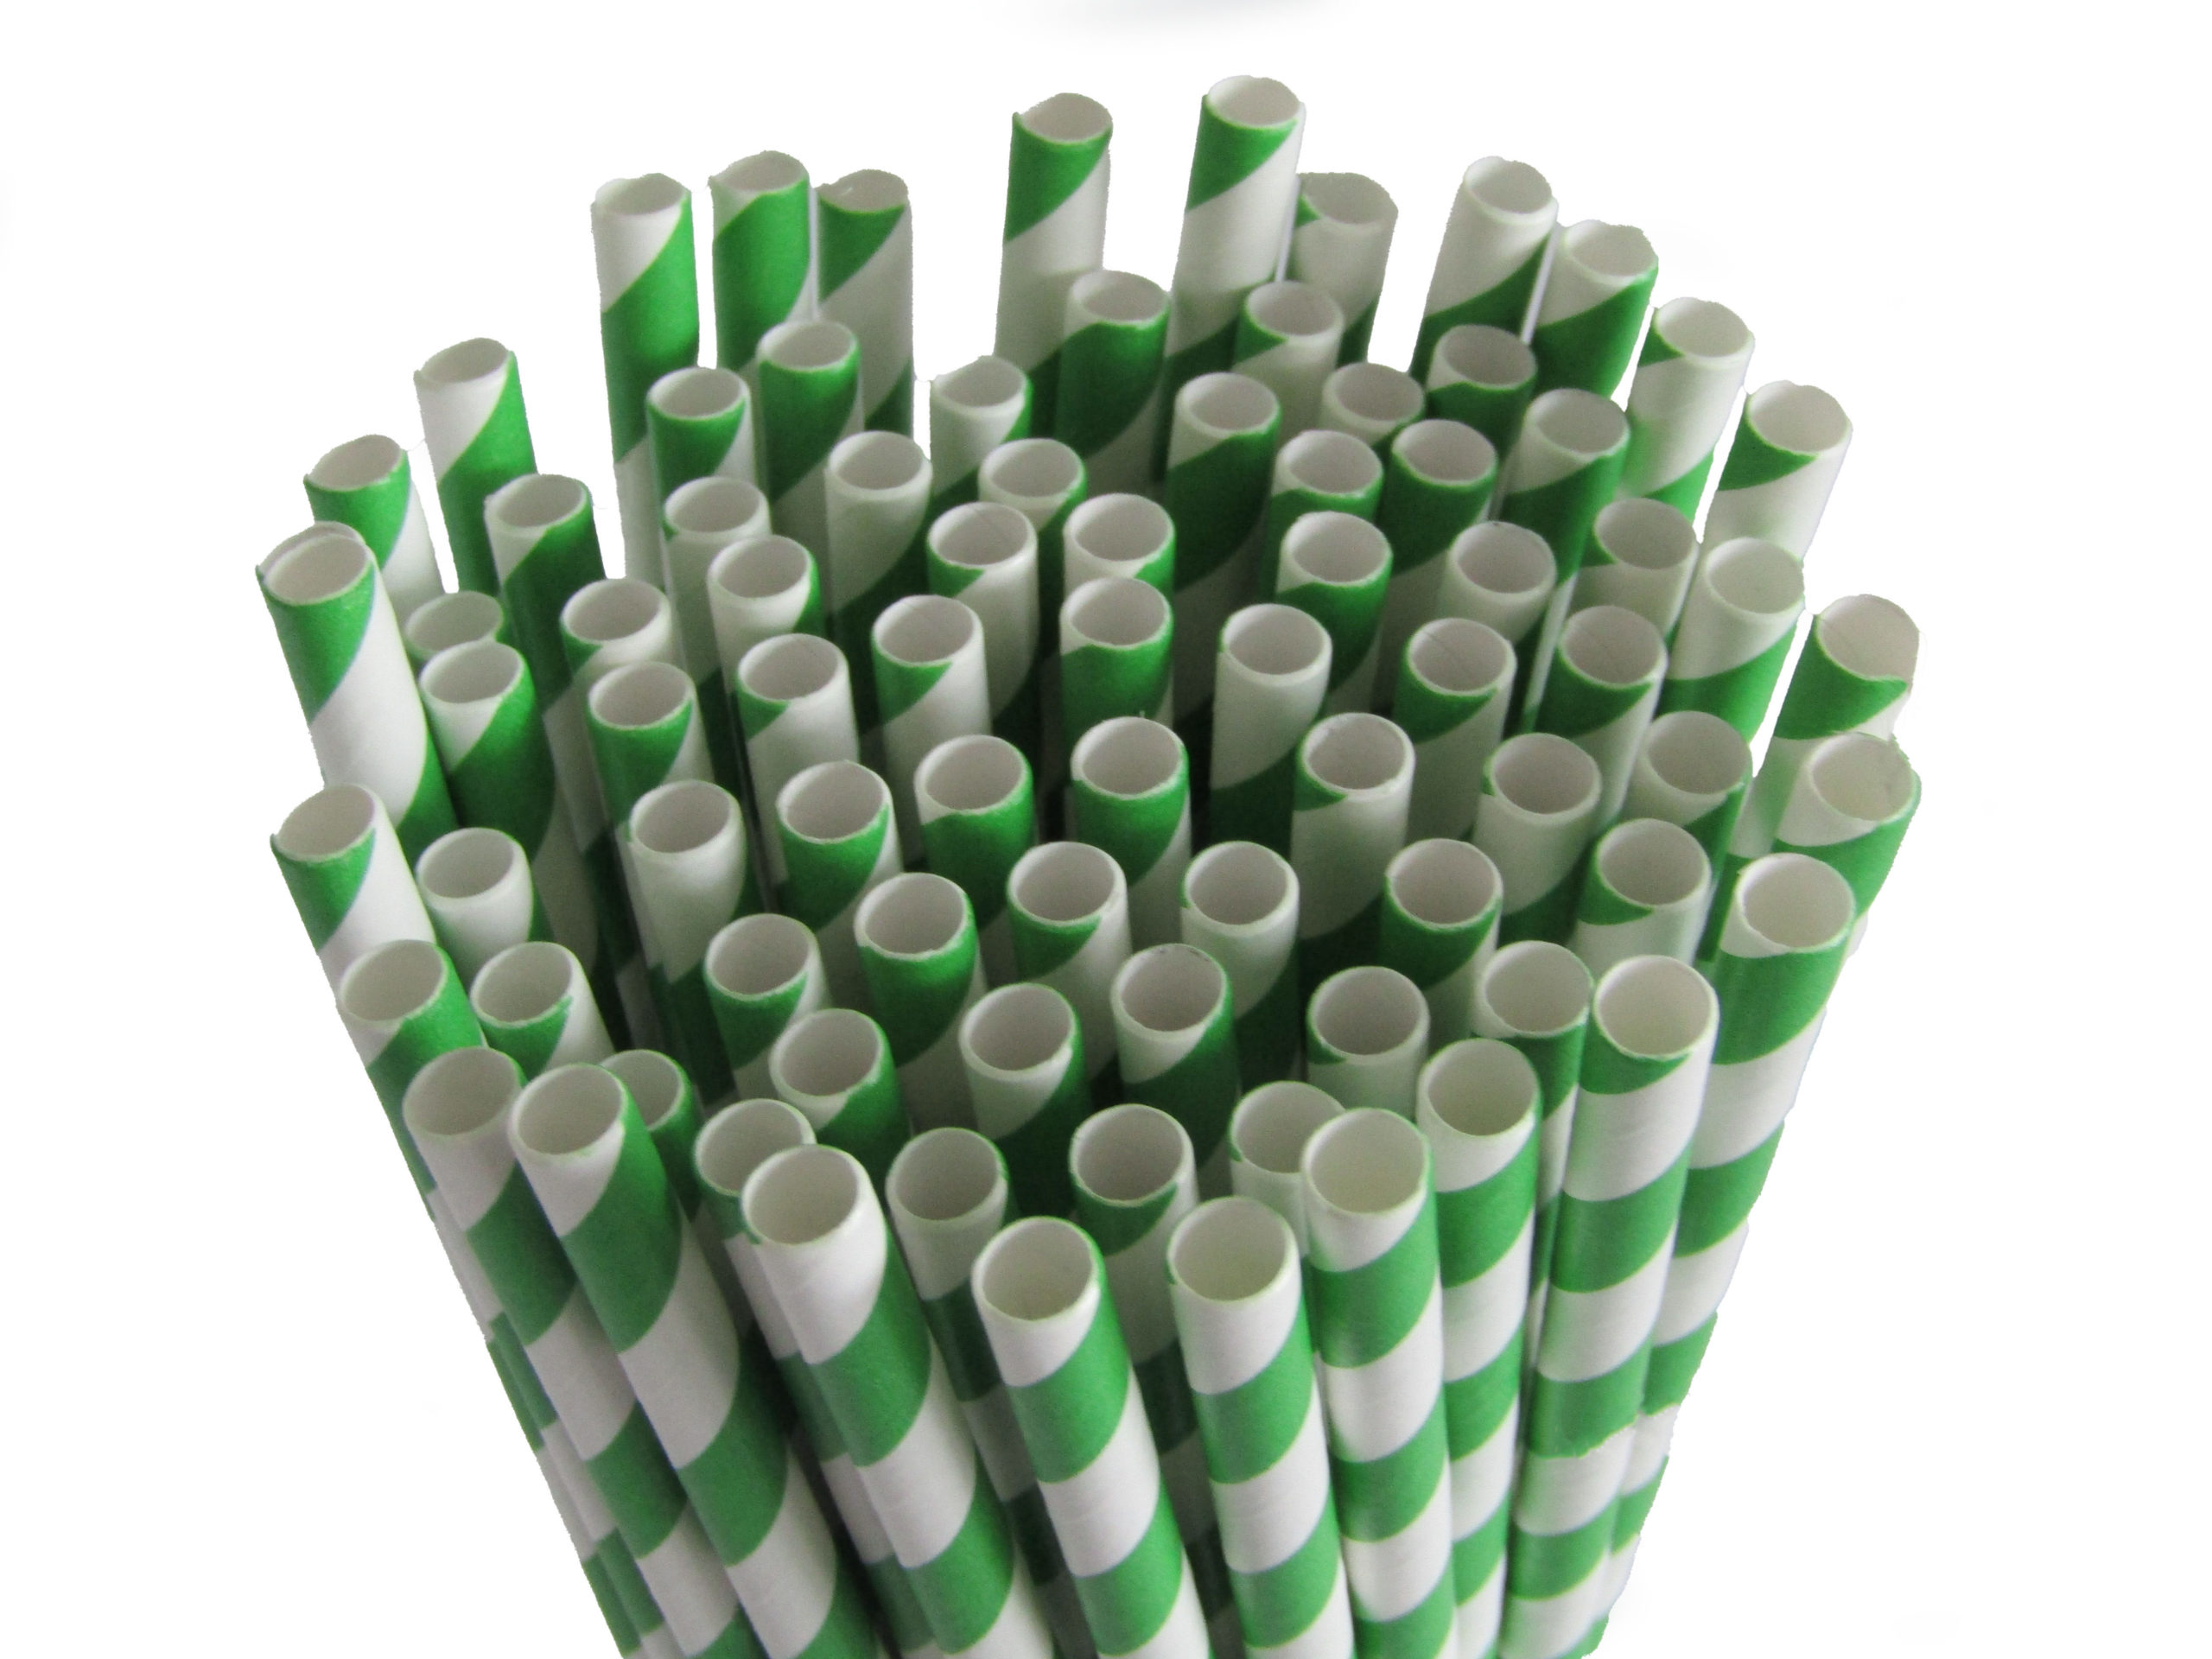 250 pcs Biodegradable Paper Drinking Straws 20cm/8inch 